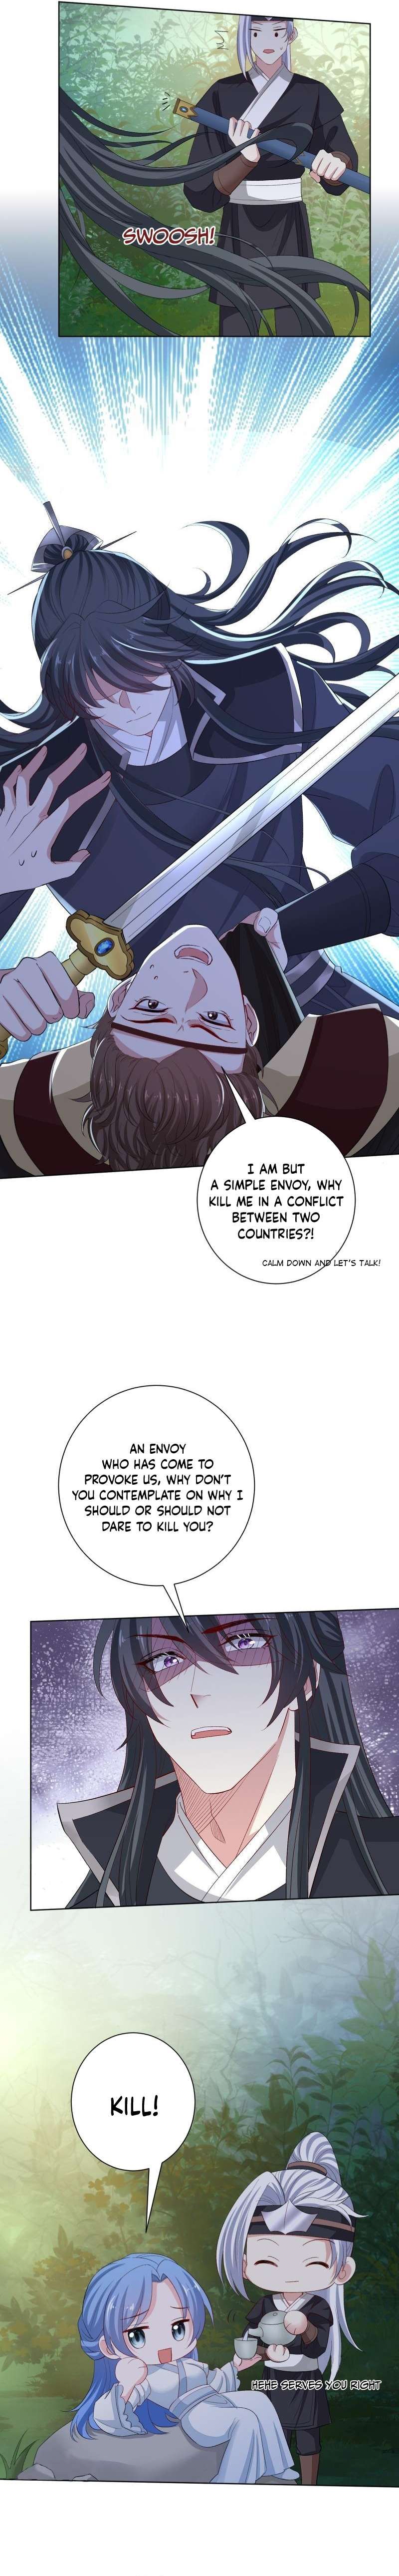 Poisonous Doctor: First Wife’s Daughter chapter 290 page 8